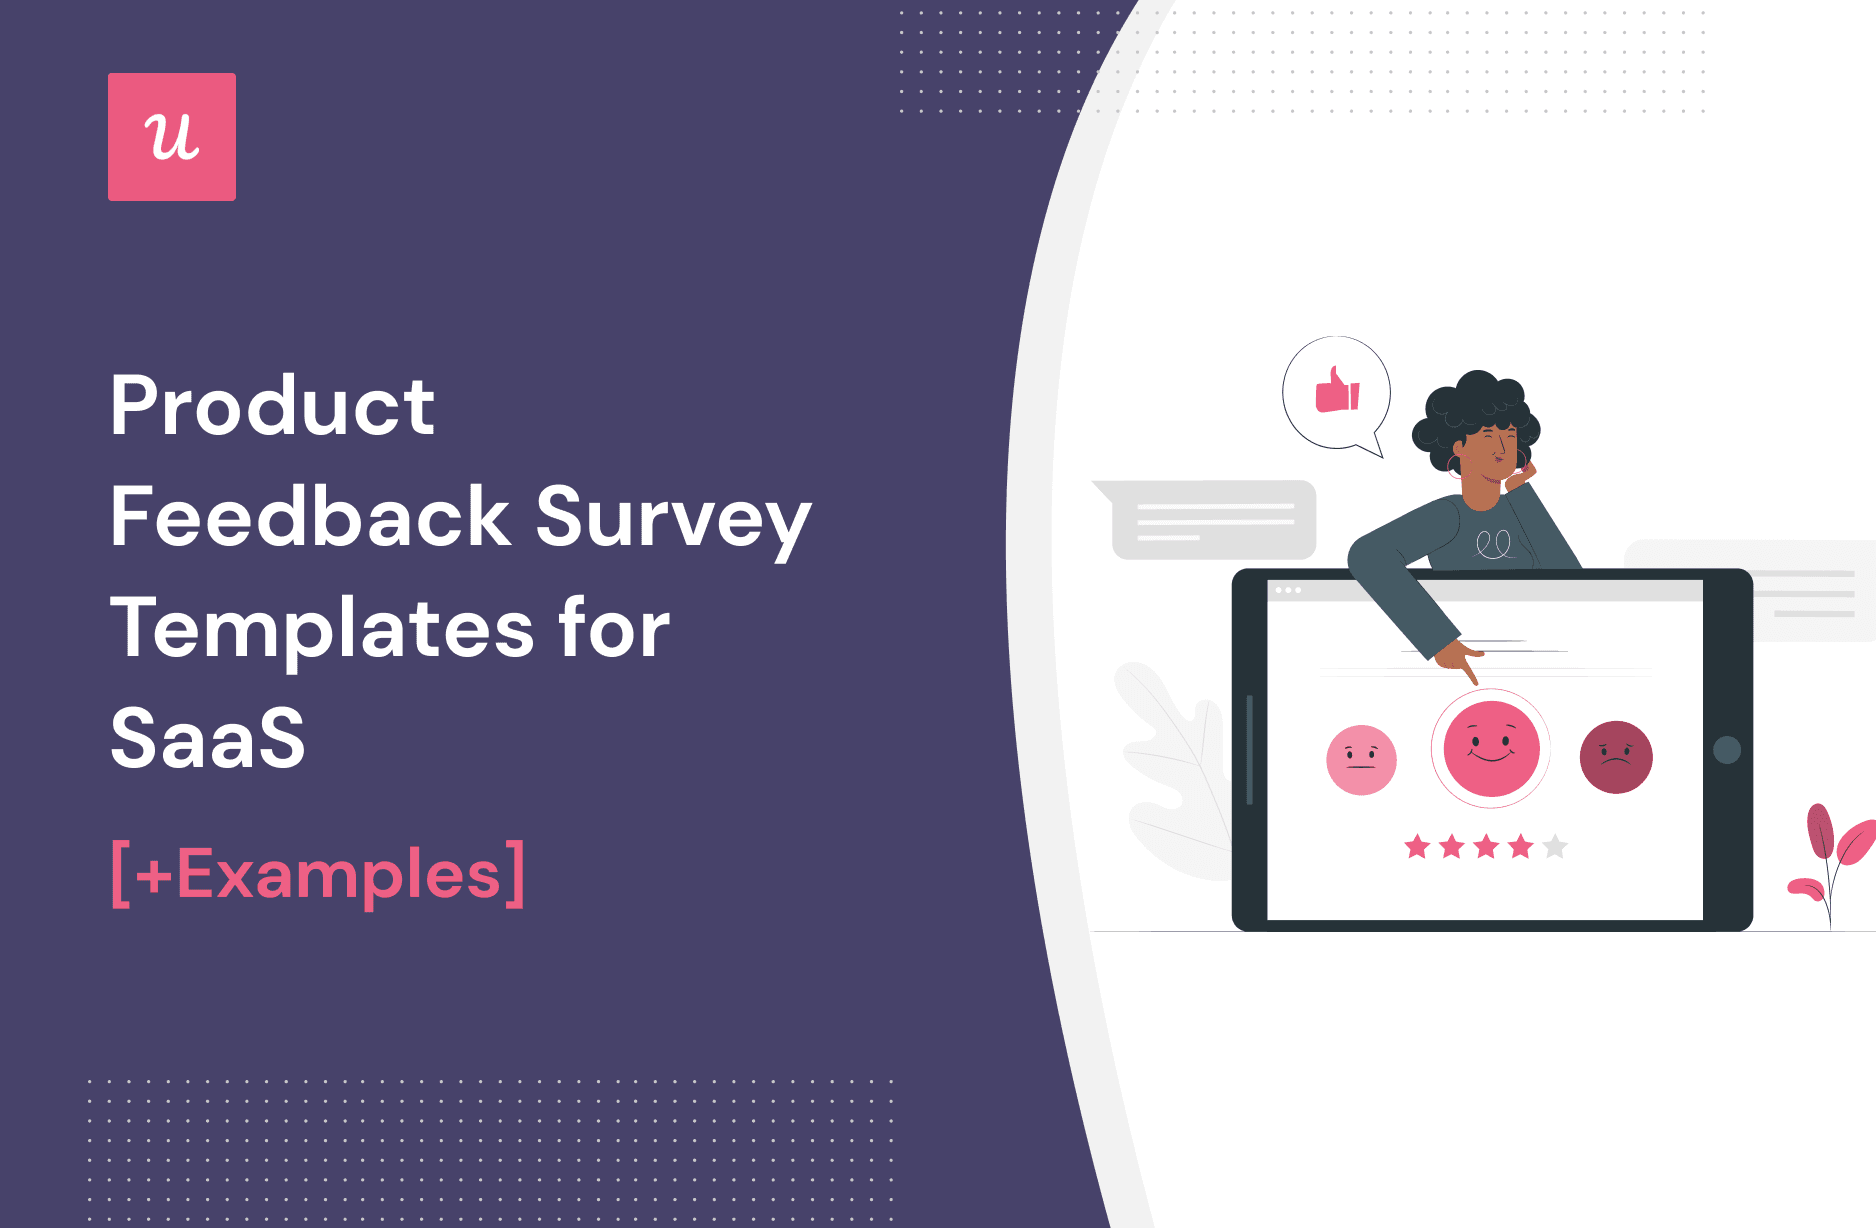 Product Feedback Survey Templates for SaaS [+ Examples] cover